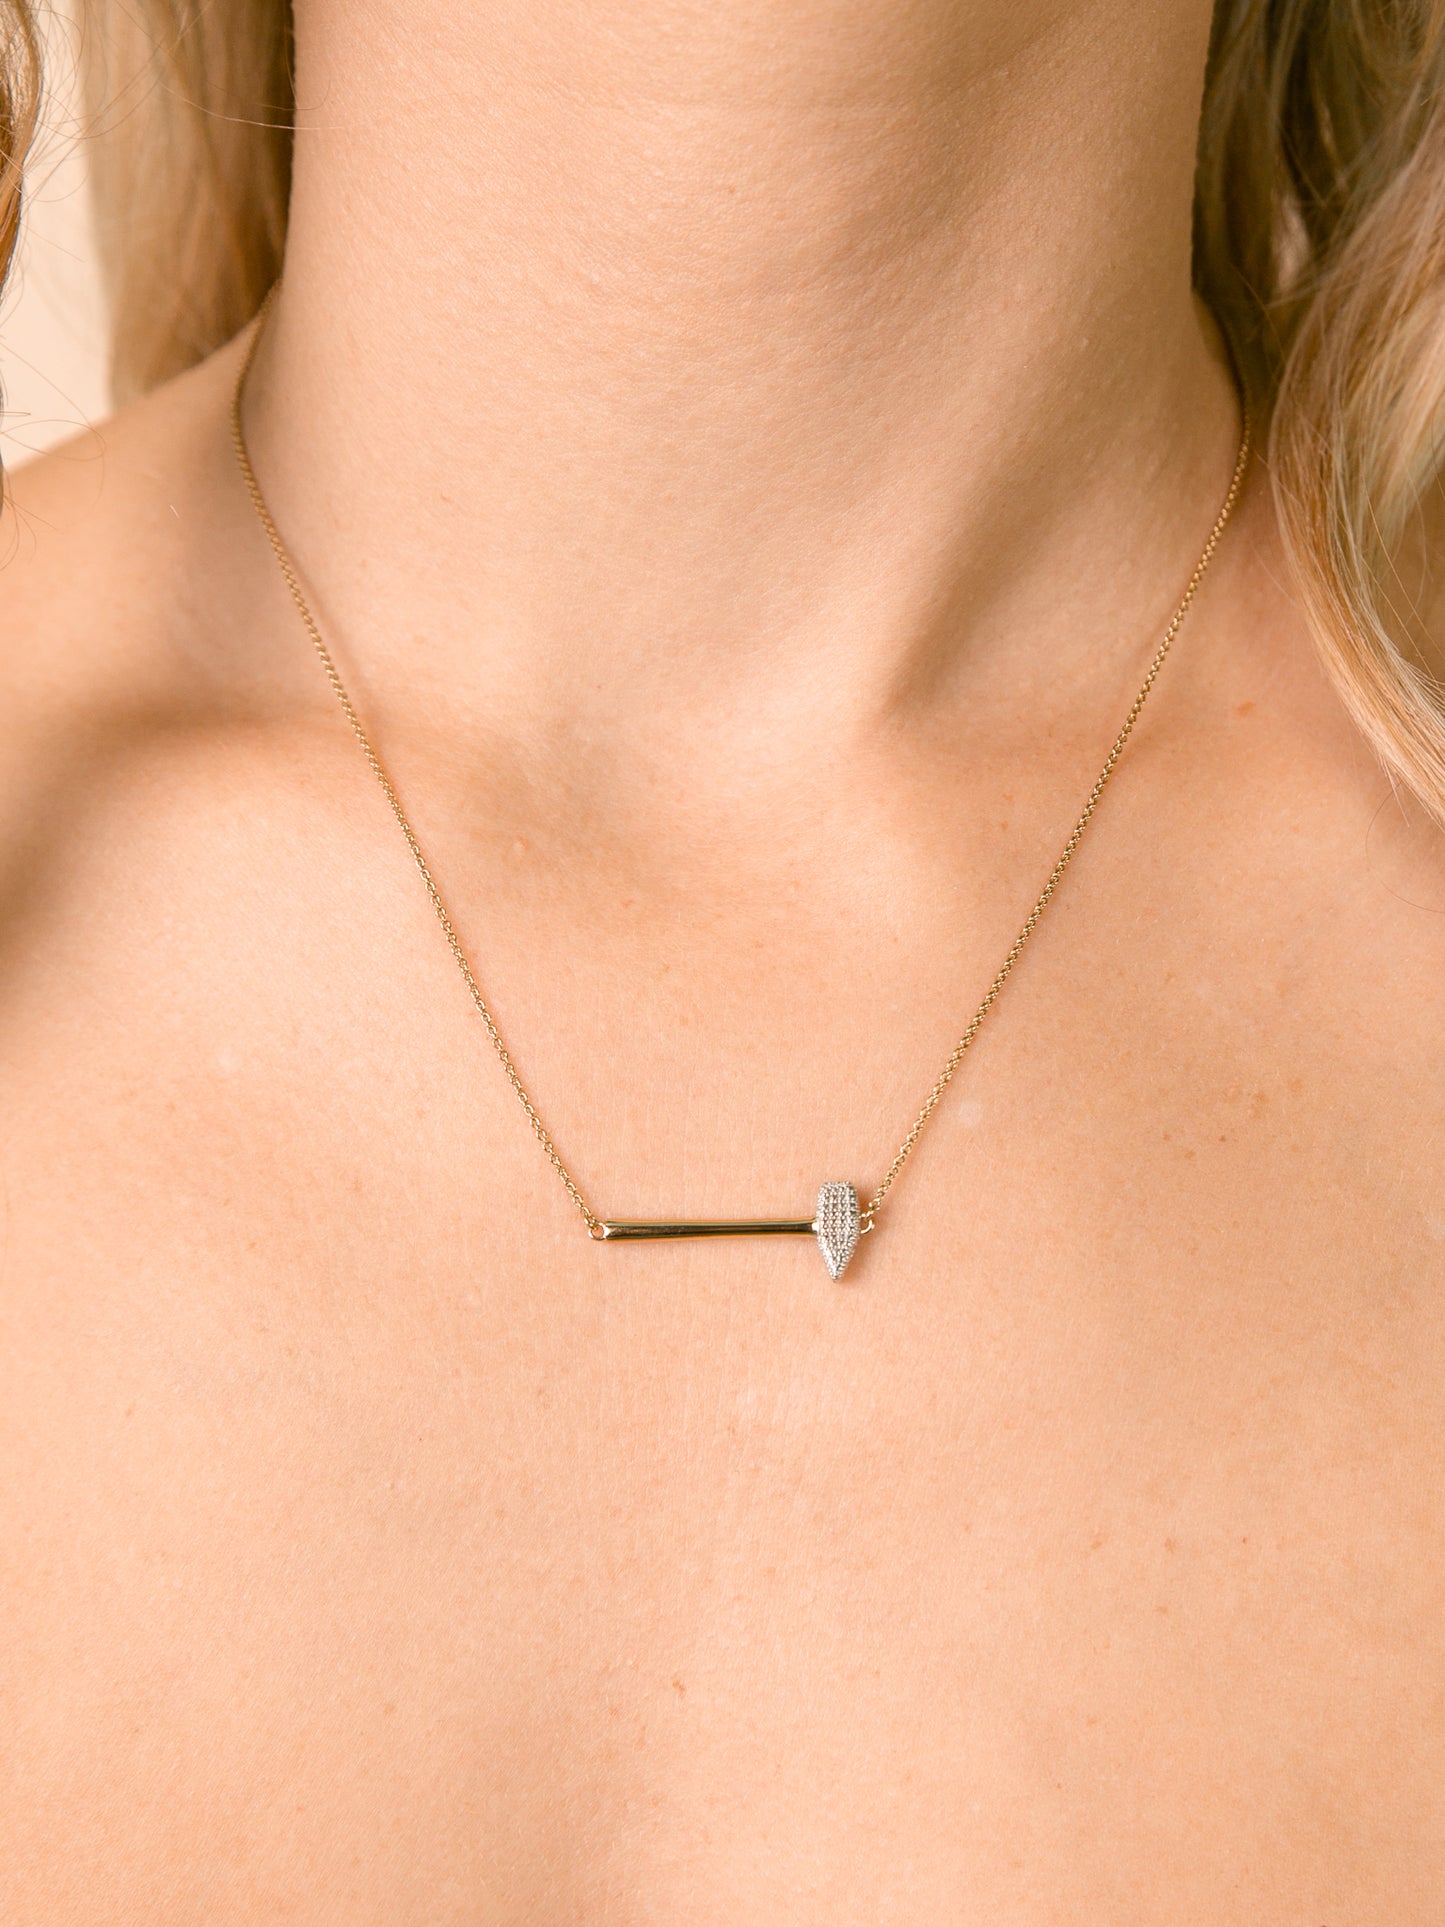 Forge Forward Necklace